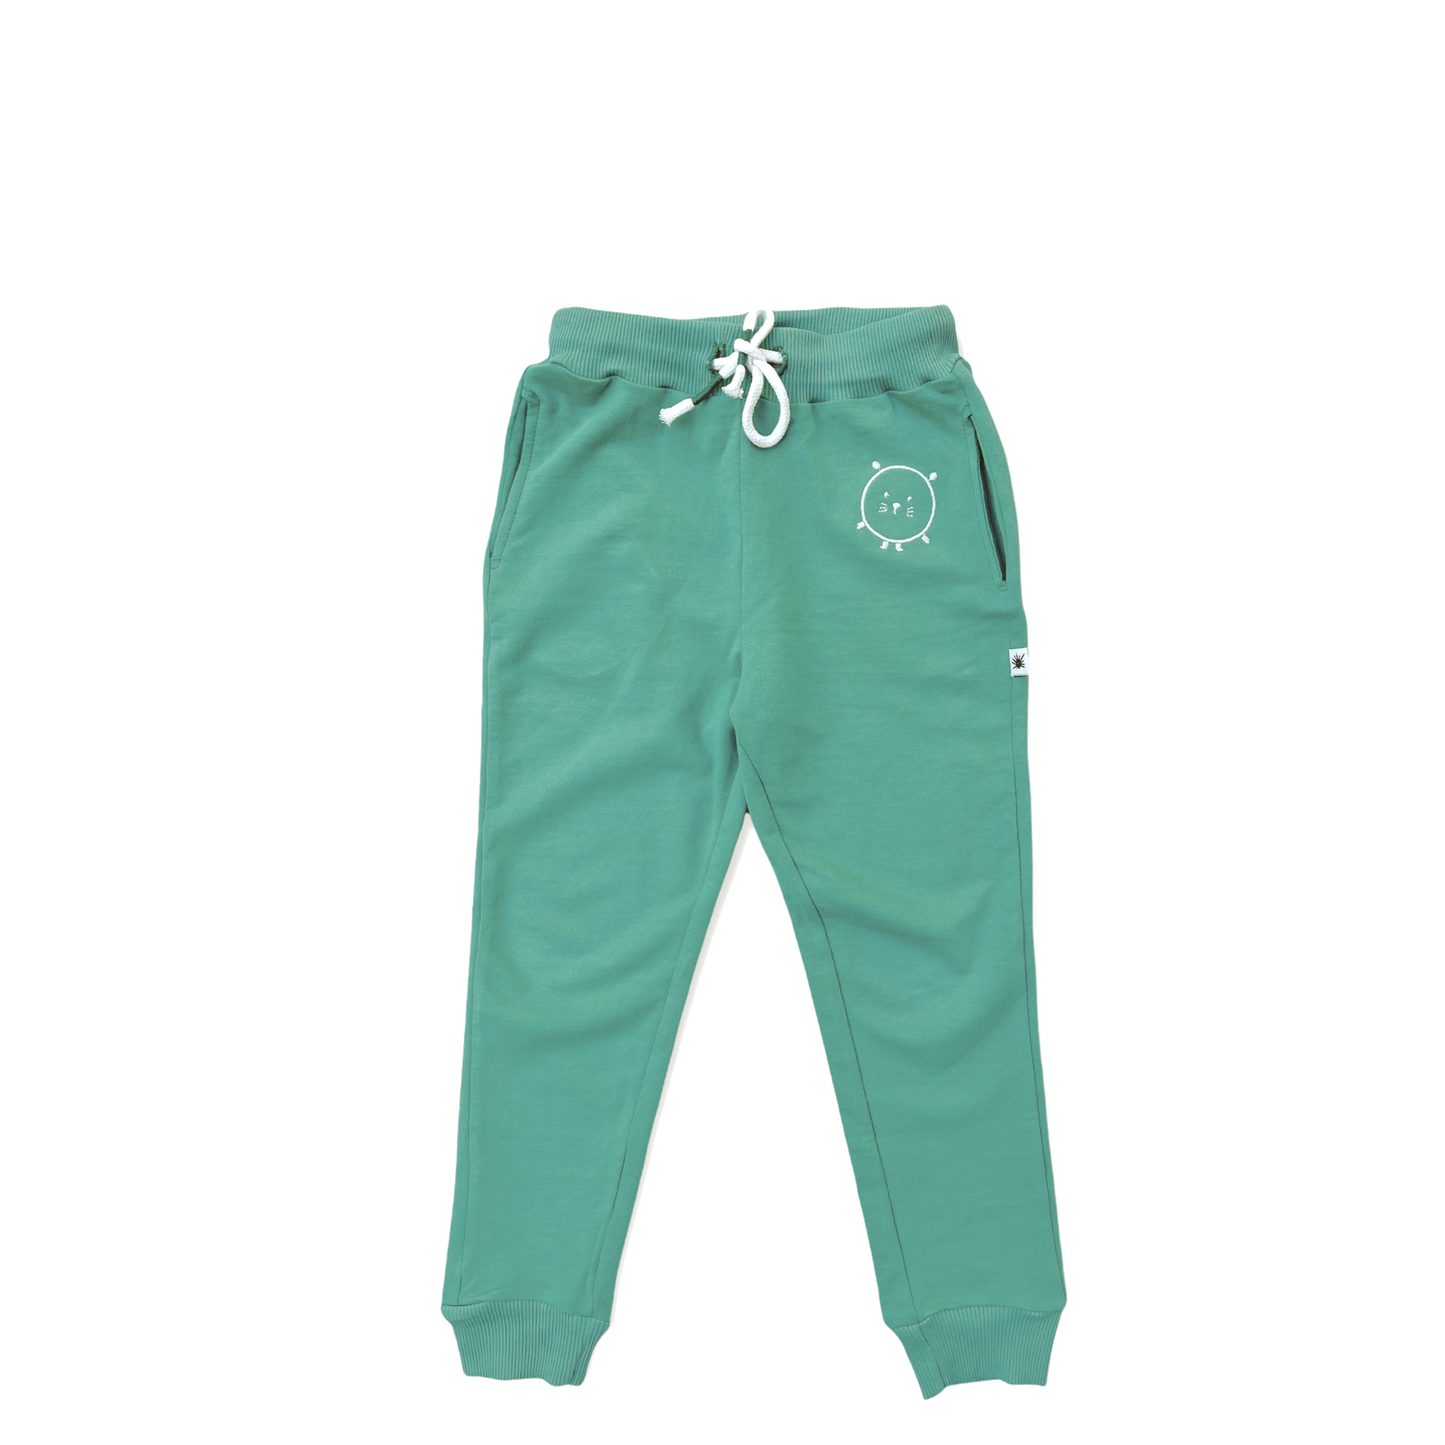 Organic "Jogger" Pants -Aged 6m to 9 Yrs- Colored Green